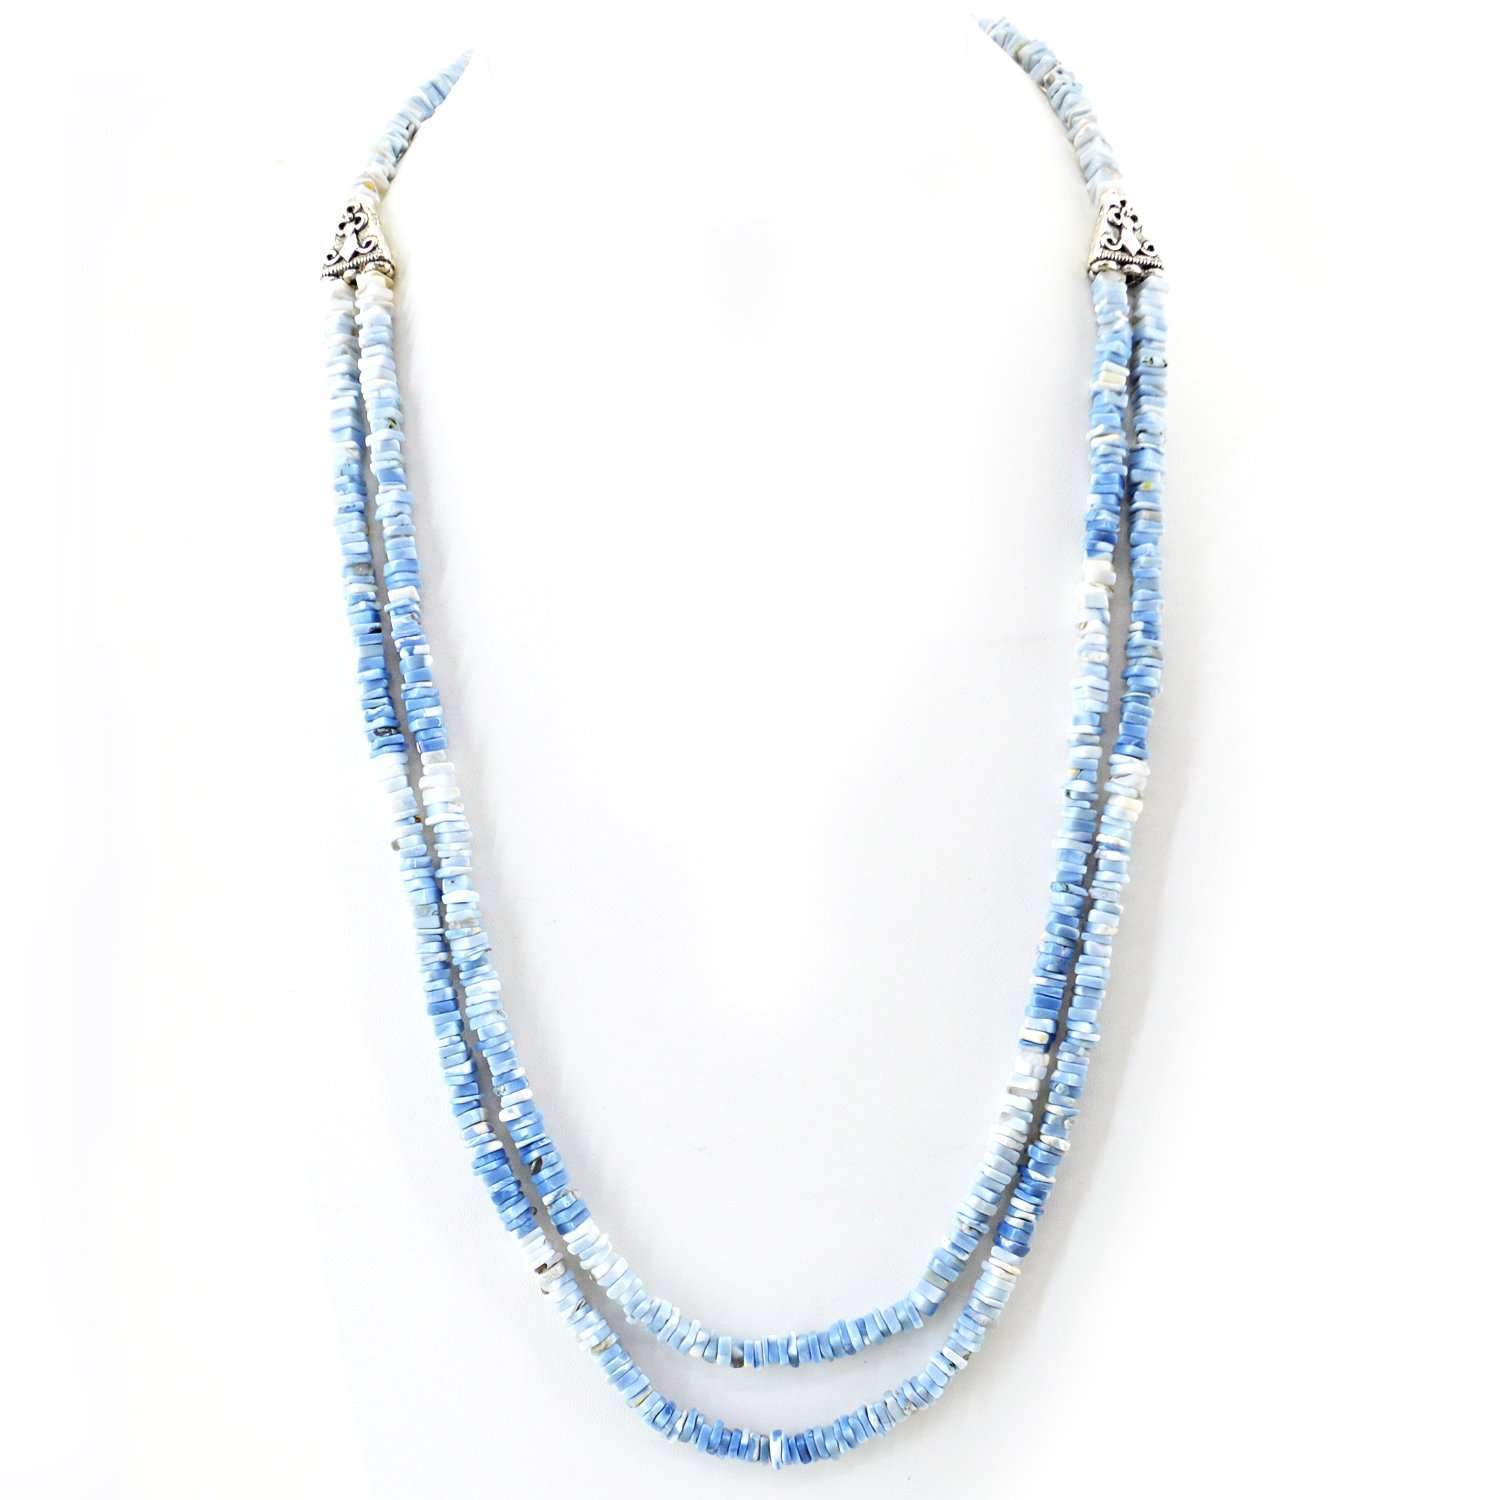 gemsmore:Natural Blue Lace Agate Necklace 3 Strand Genuine Beads